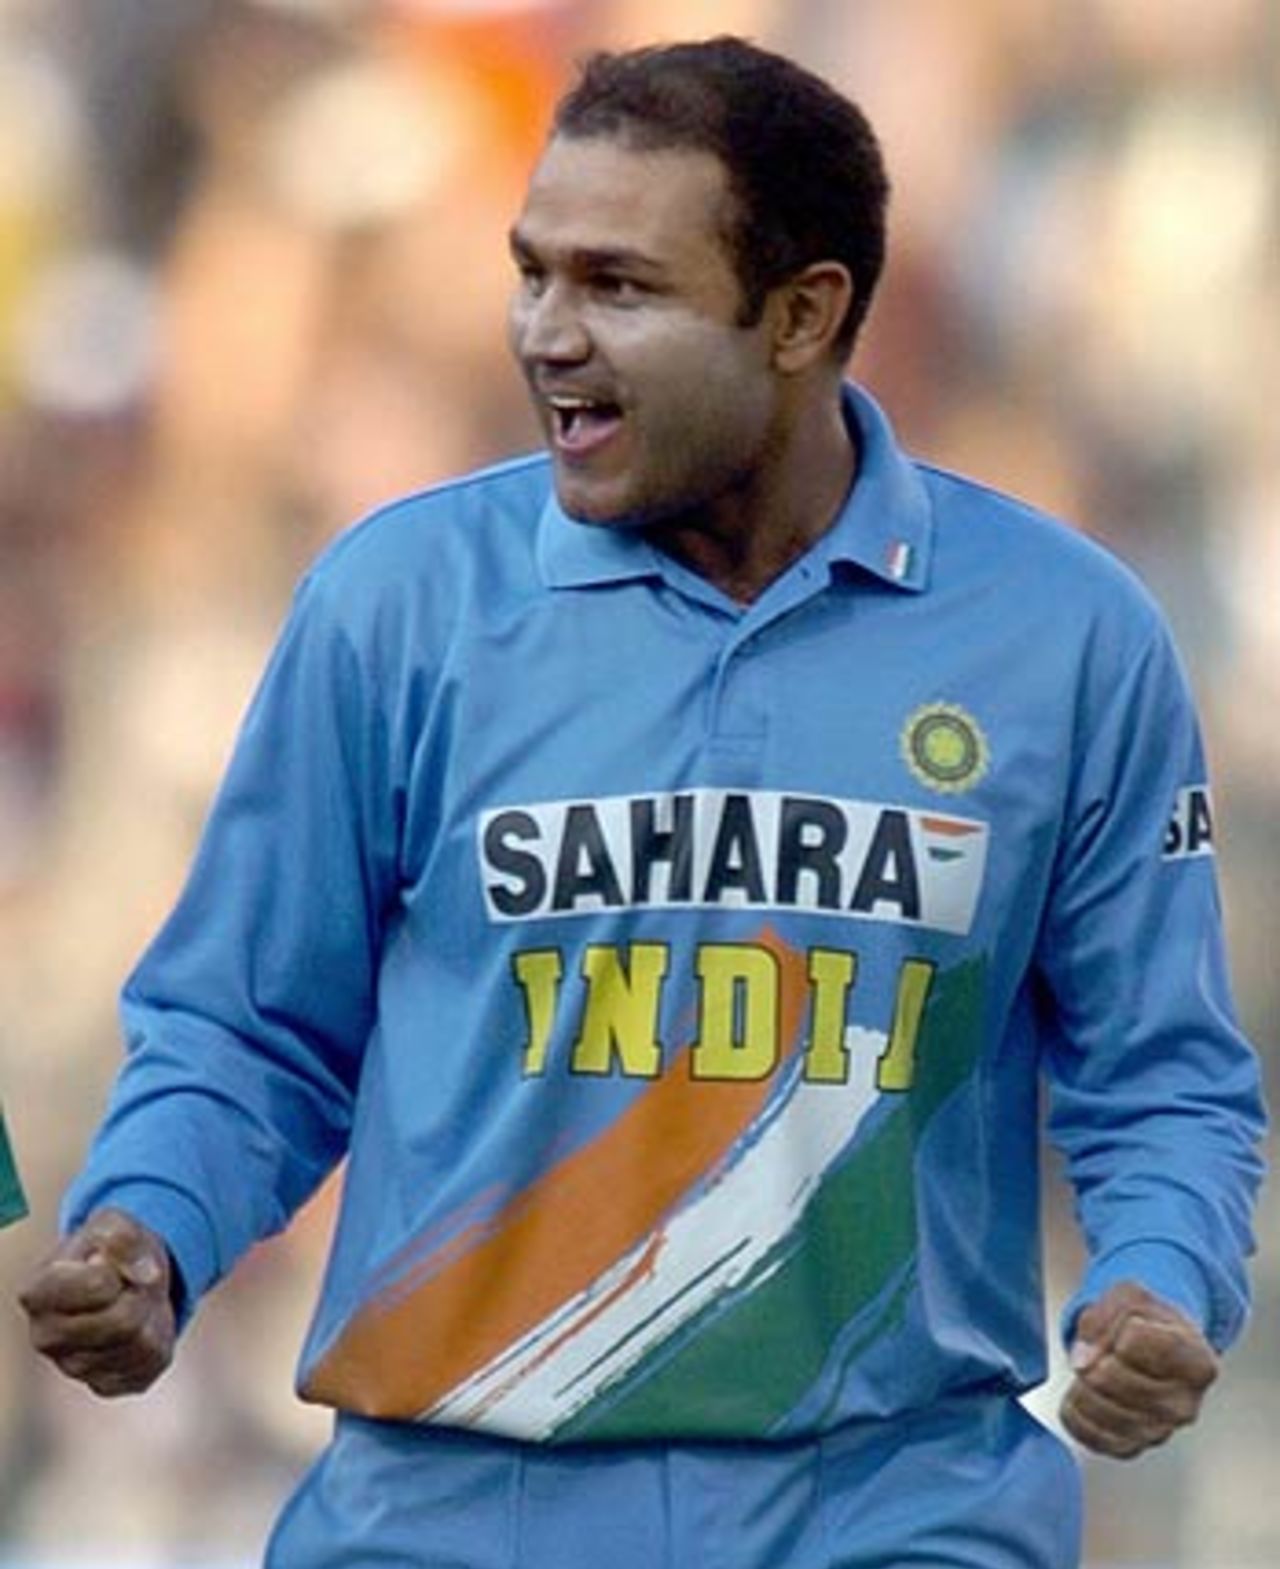 Virender Sehwag took two crucial wickets to stifle South Africa, India v South Africa, 2nd ODI, Bangalore, November 19, 2005